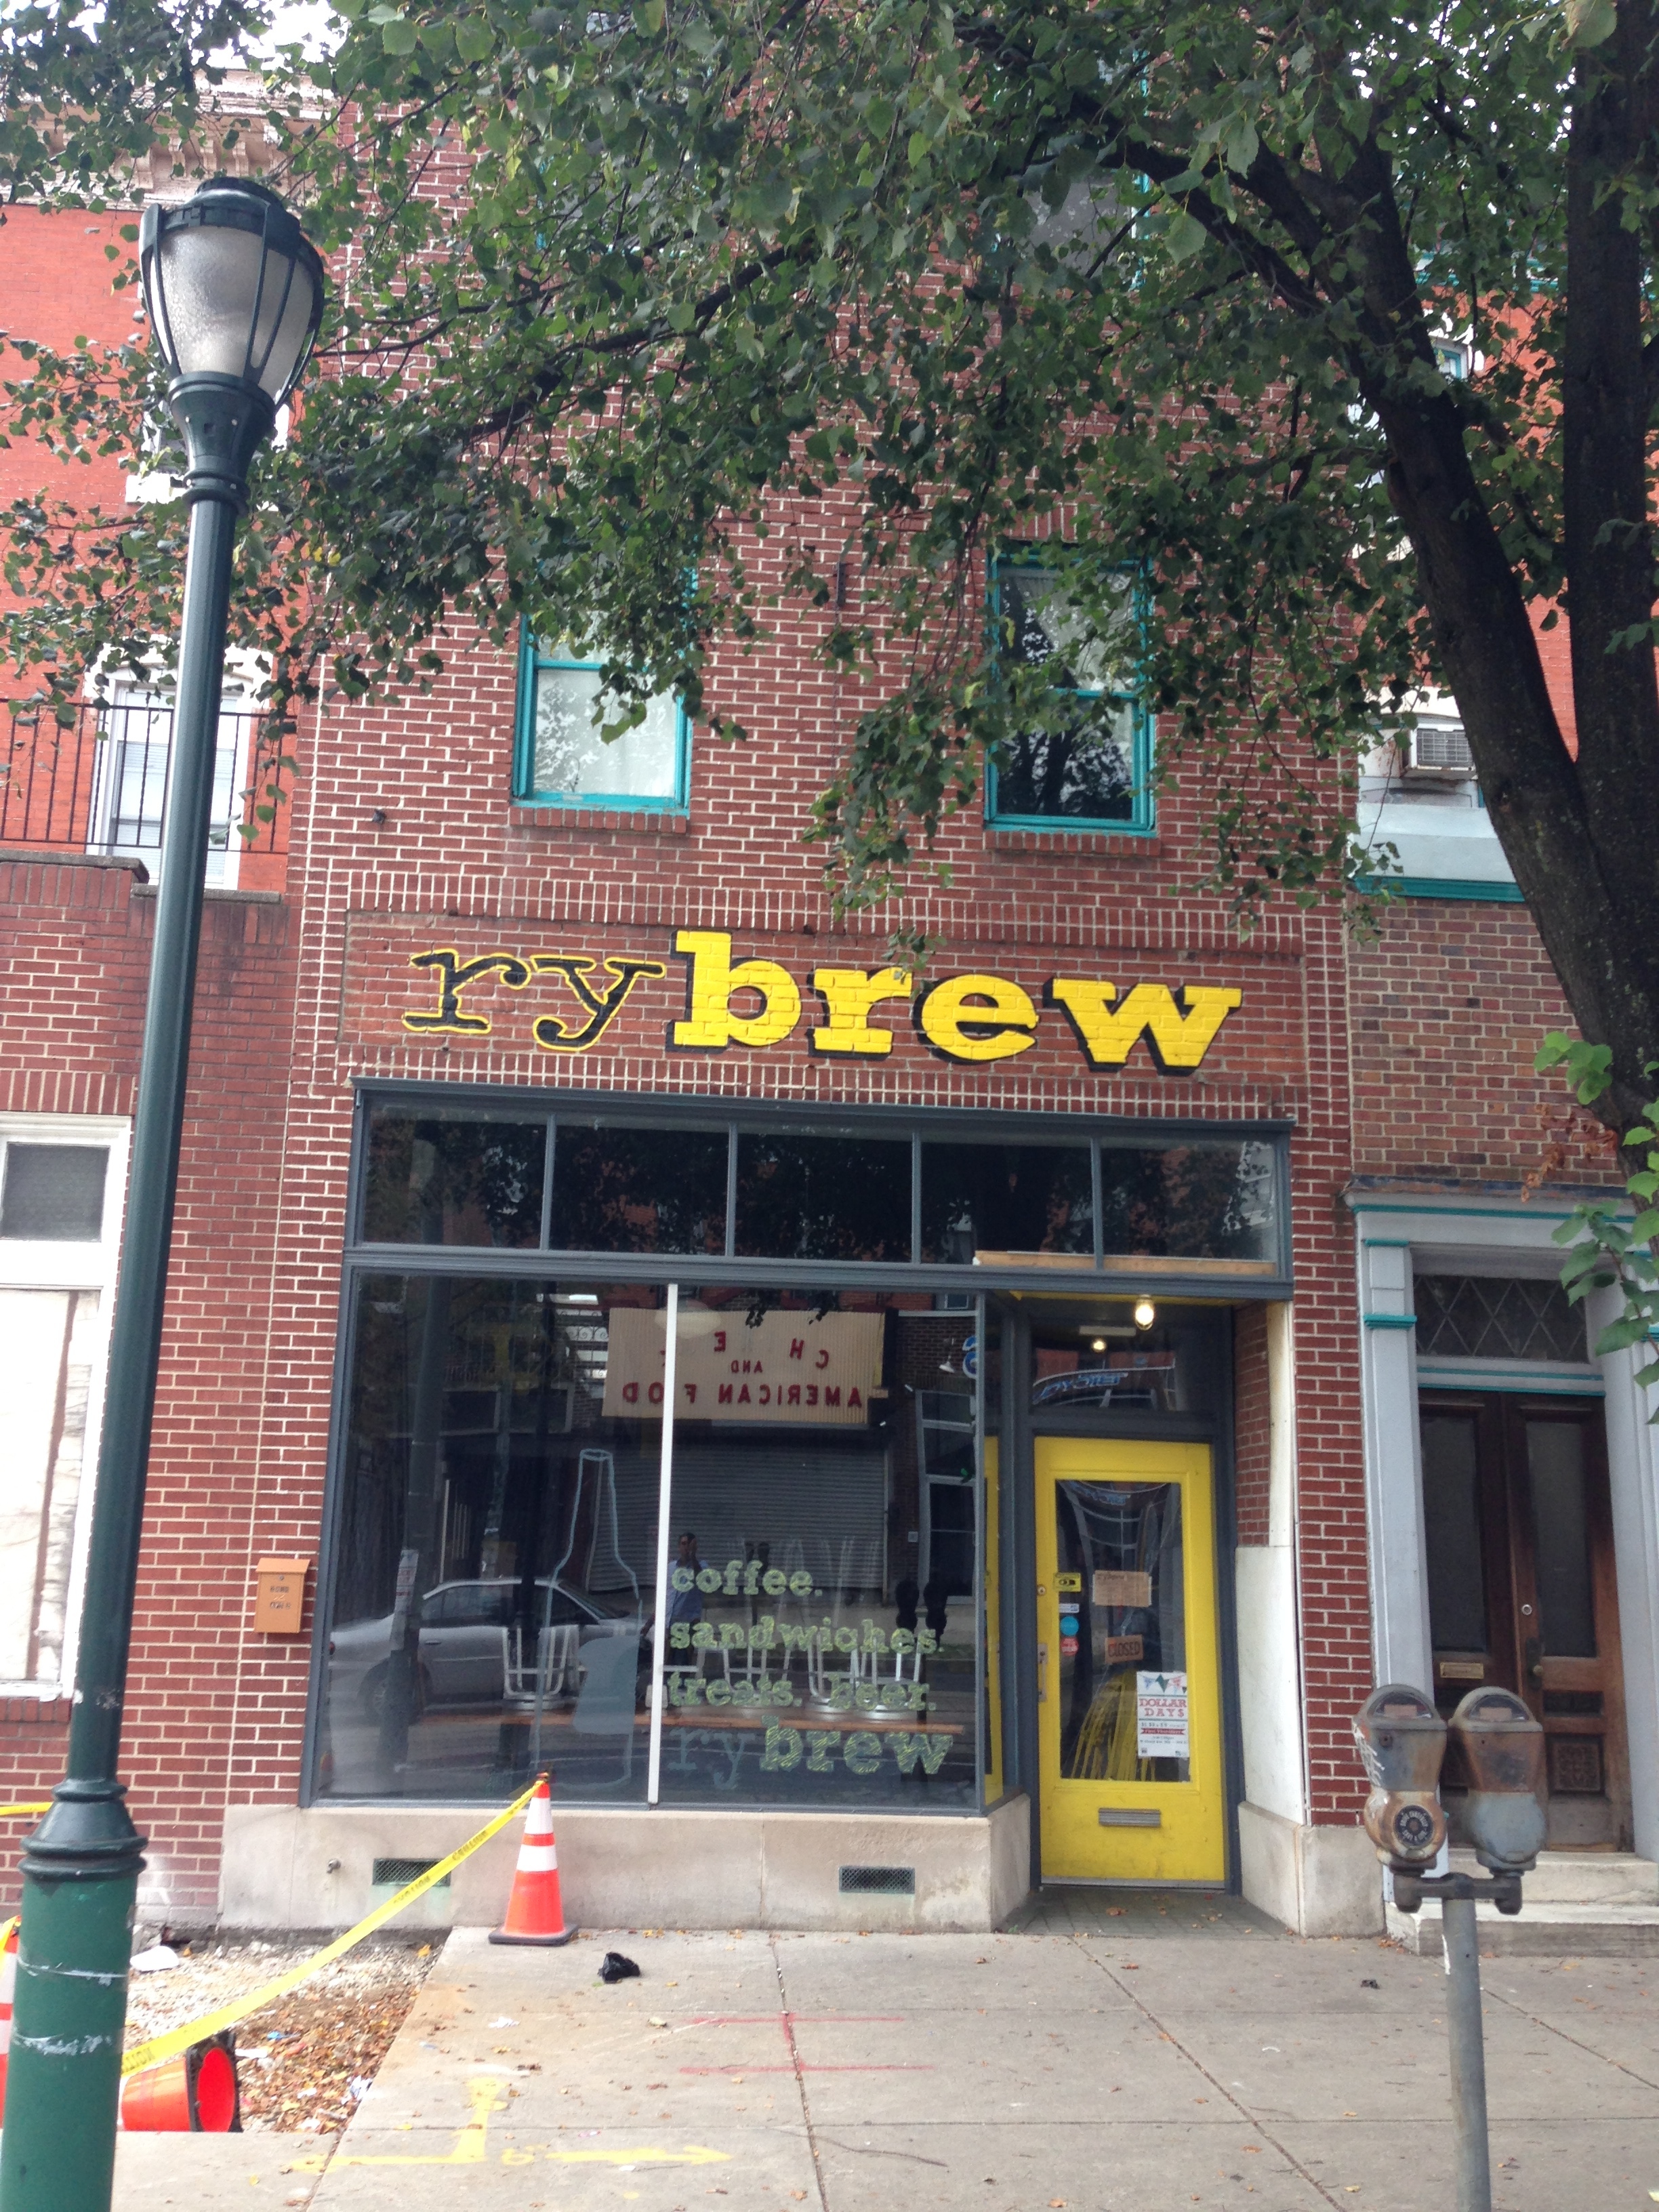 AFTER: Rybrew, Girard Avenue